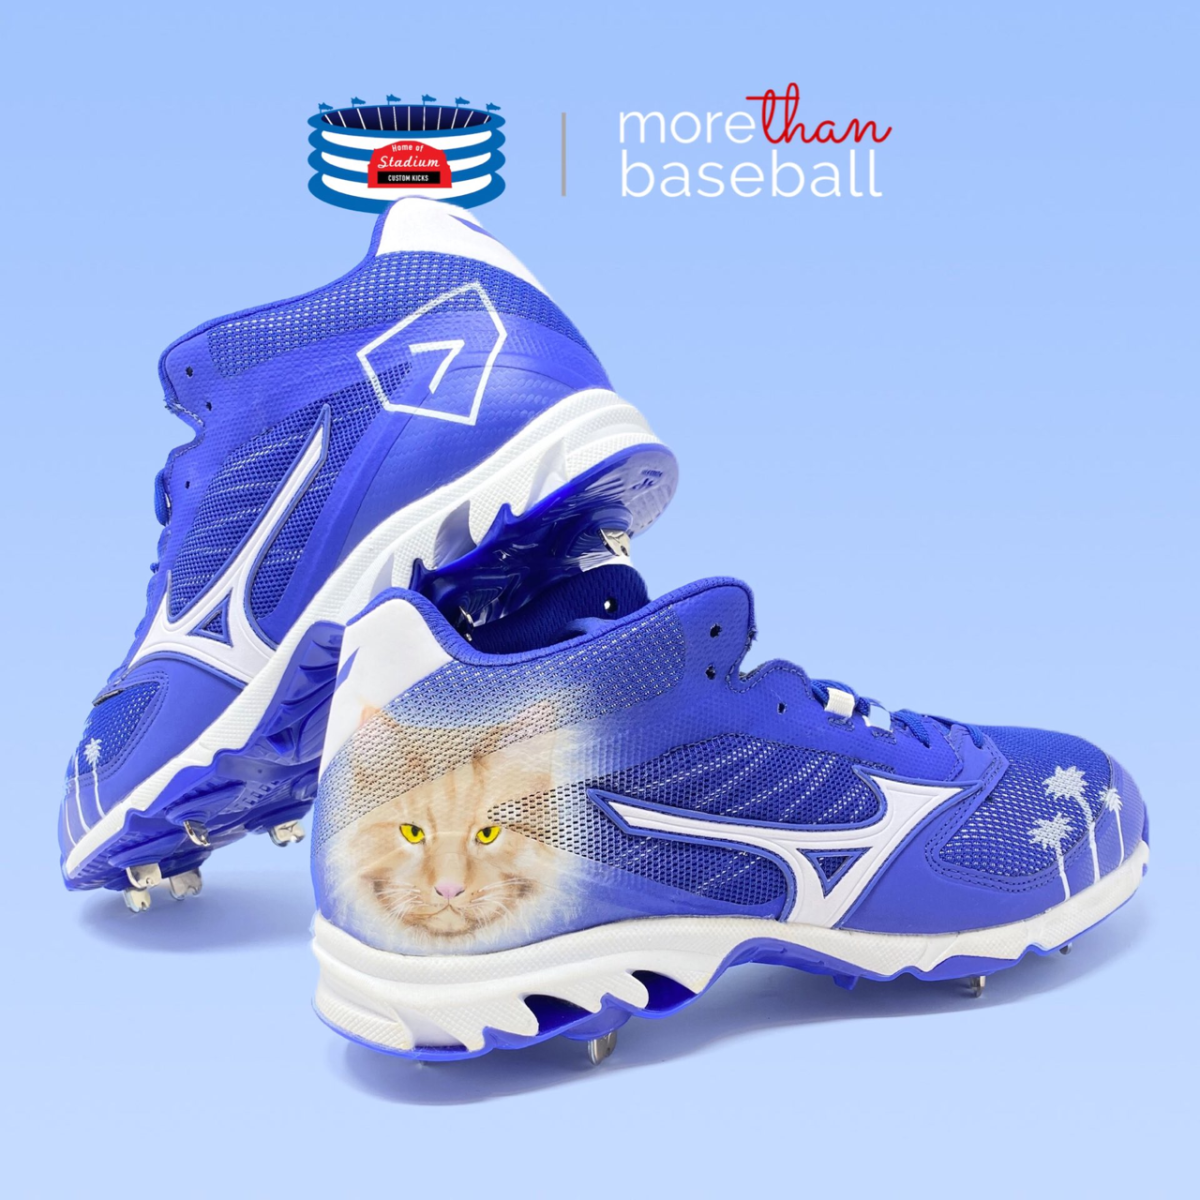 Dodgers postgame: Tony Gonsolin explains cleats to honor cats